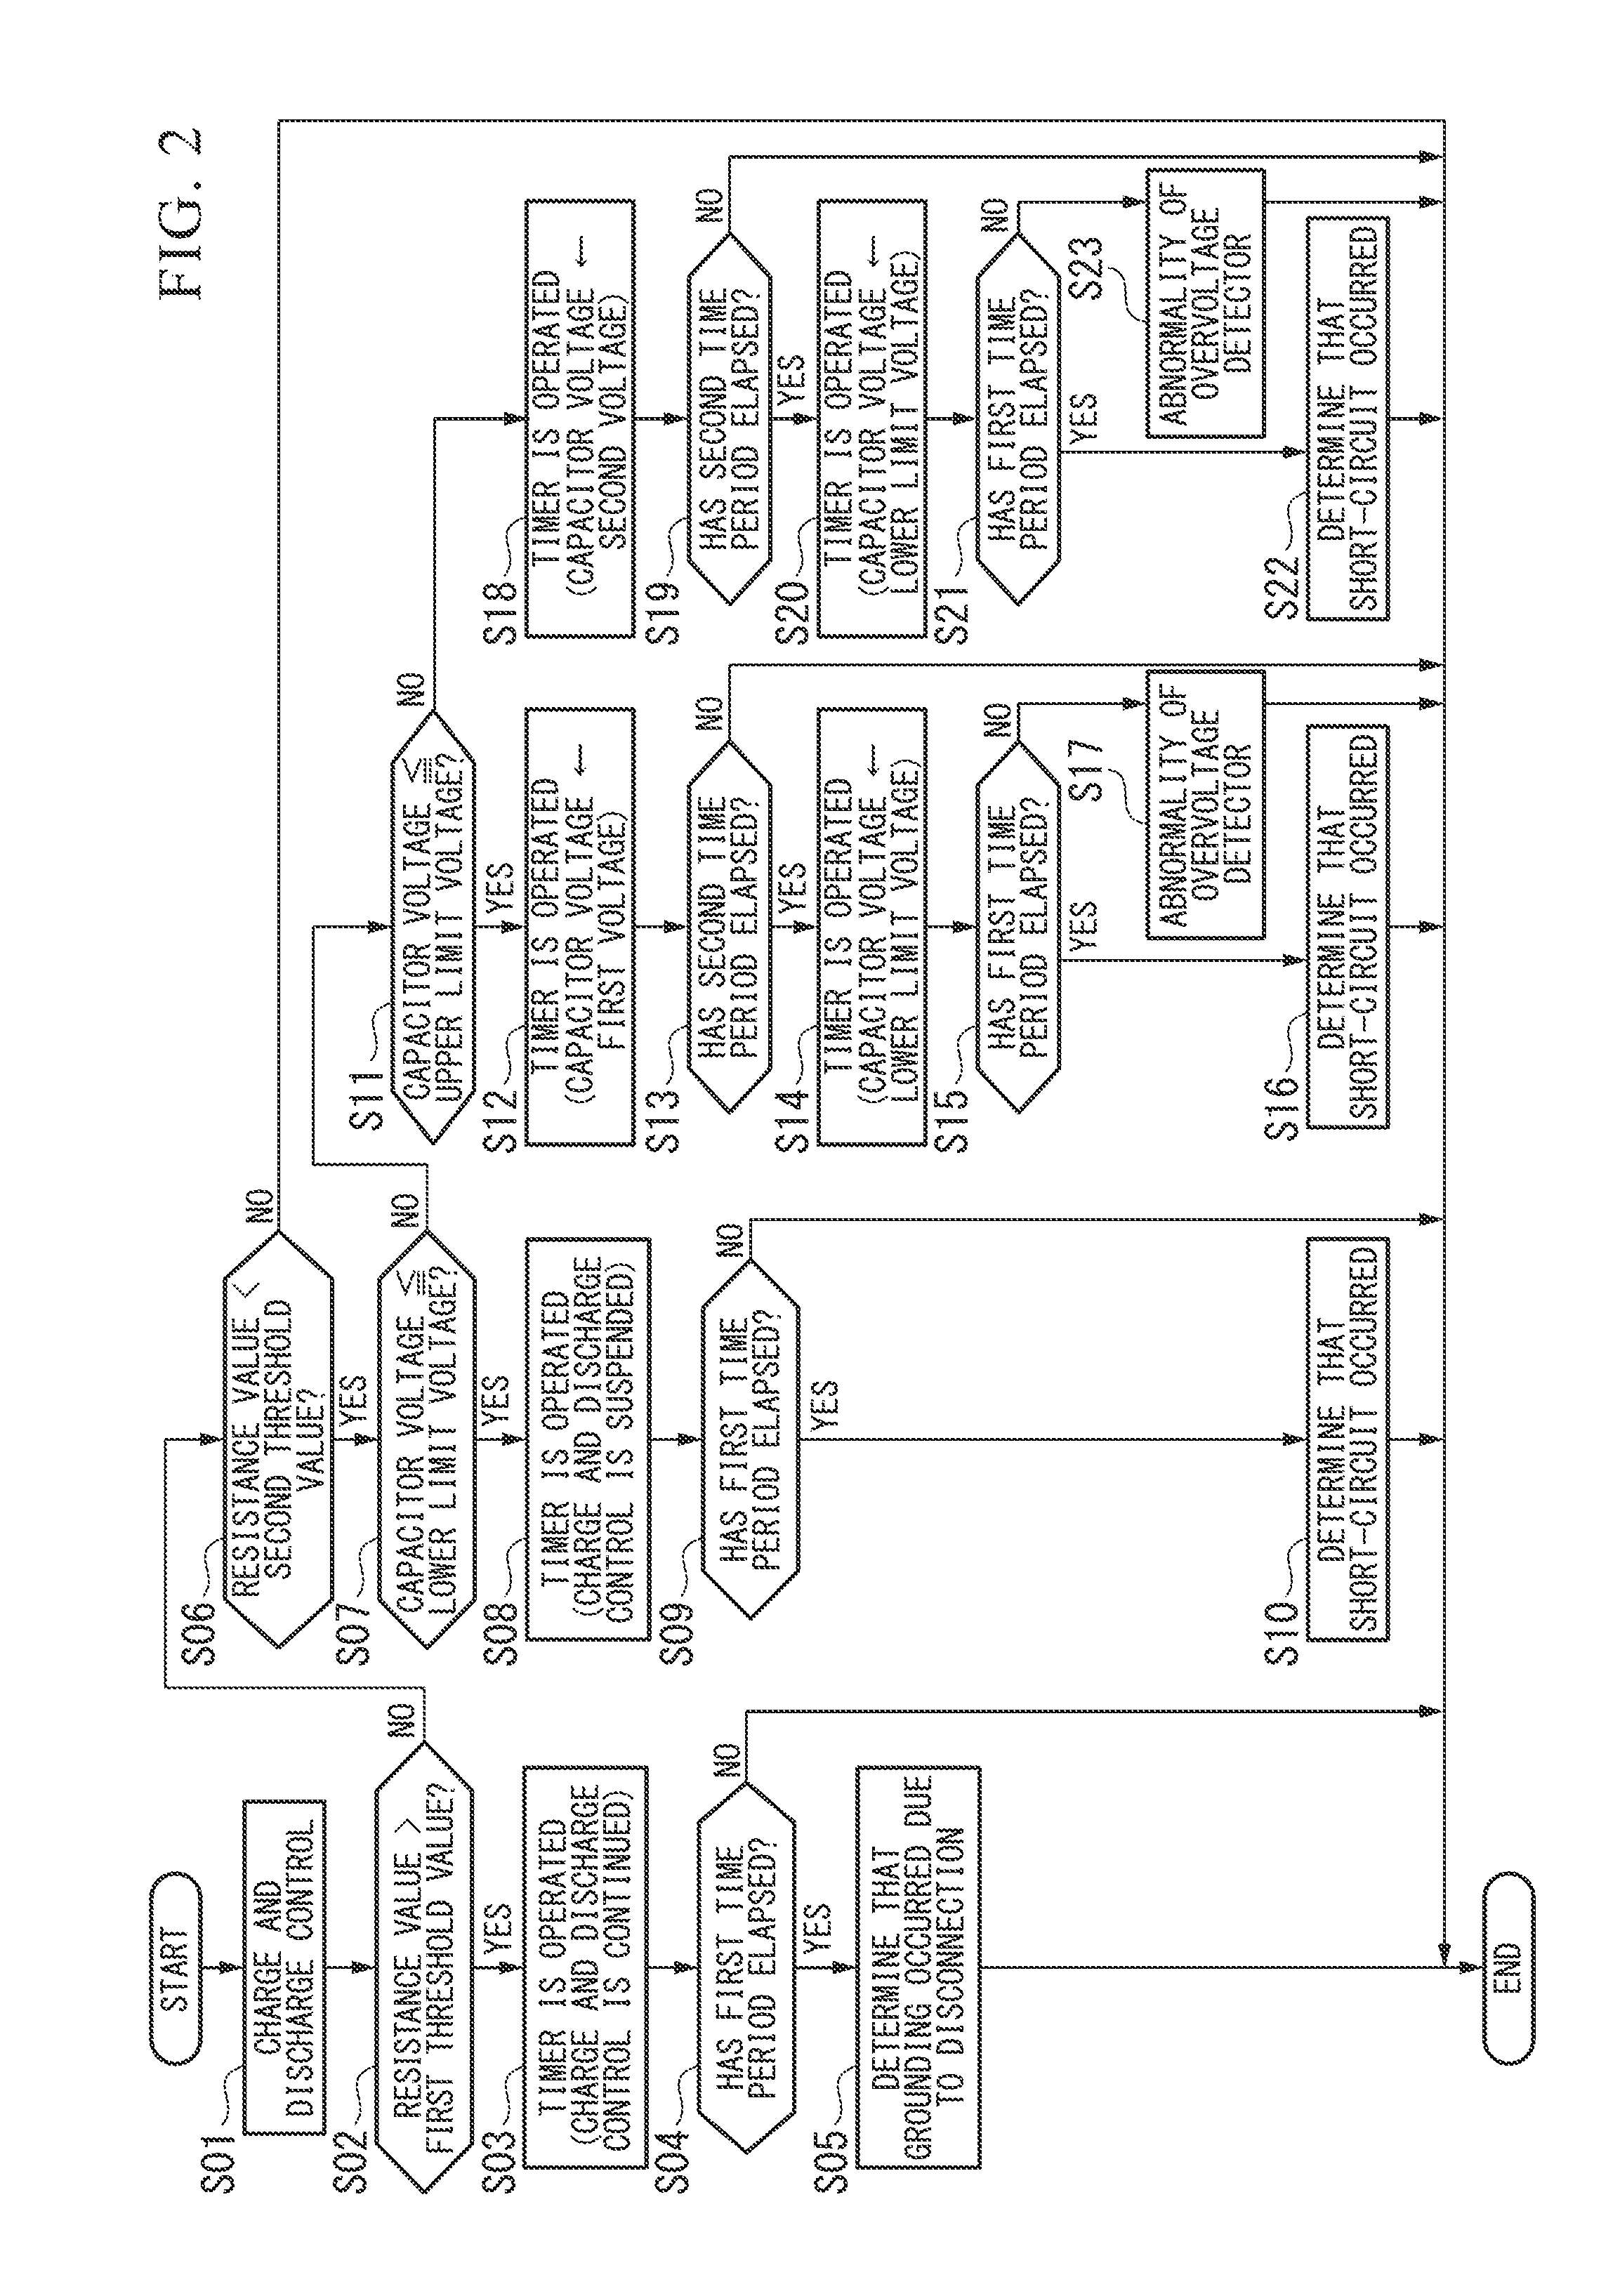 Abnormality detection device